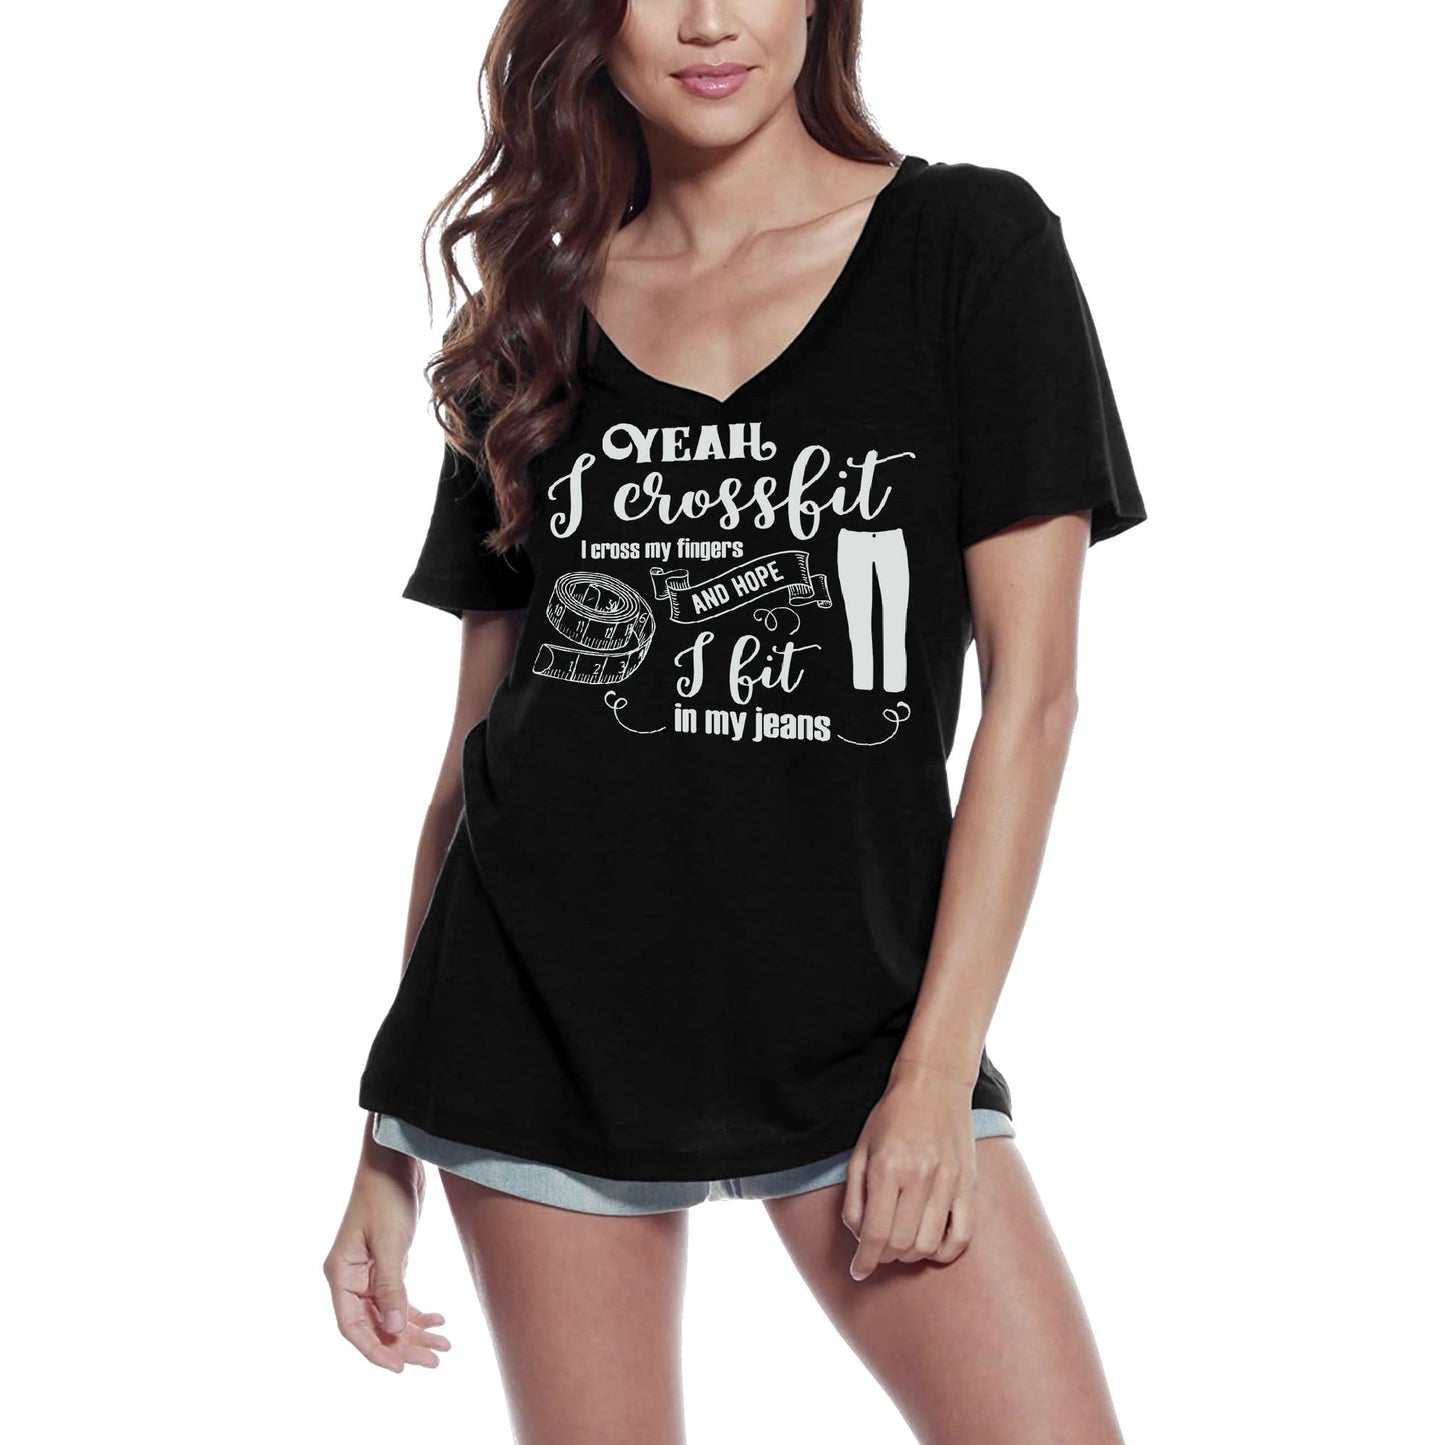 ULTRABASIC Women's T-Shirt Yeah I Cross My Fingers And Hope I Fit My Jeans - Funny Quote